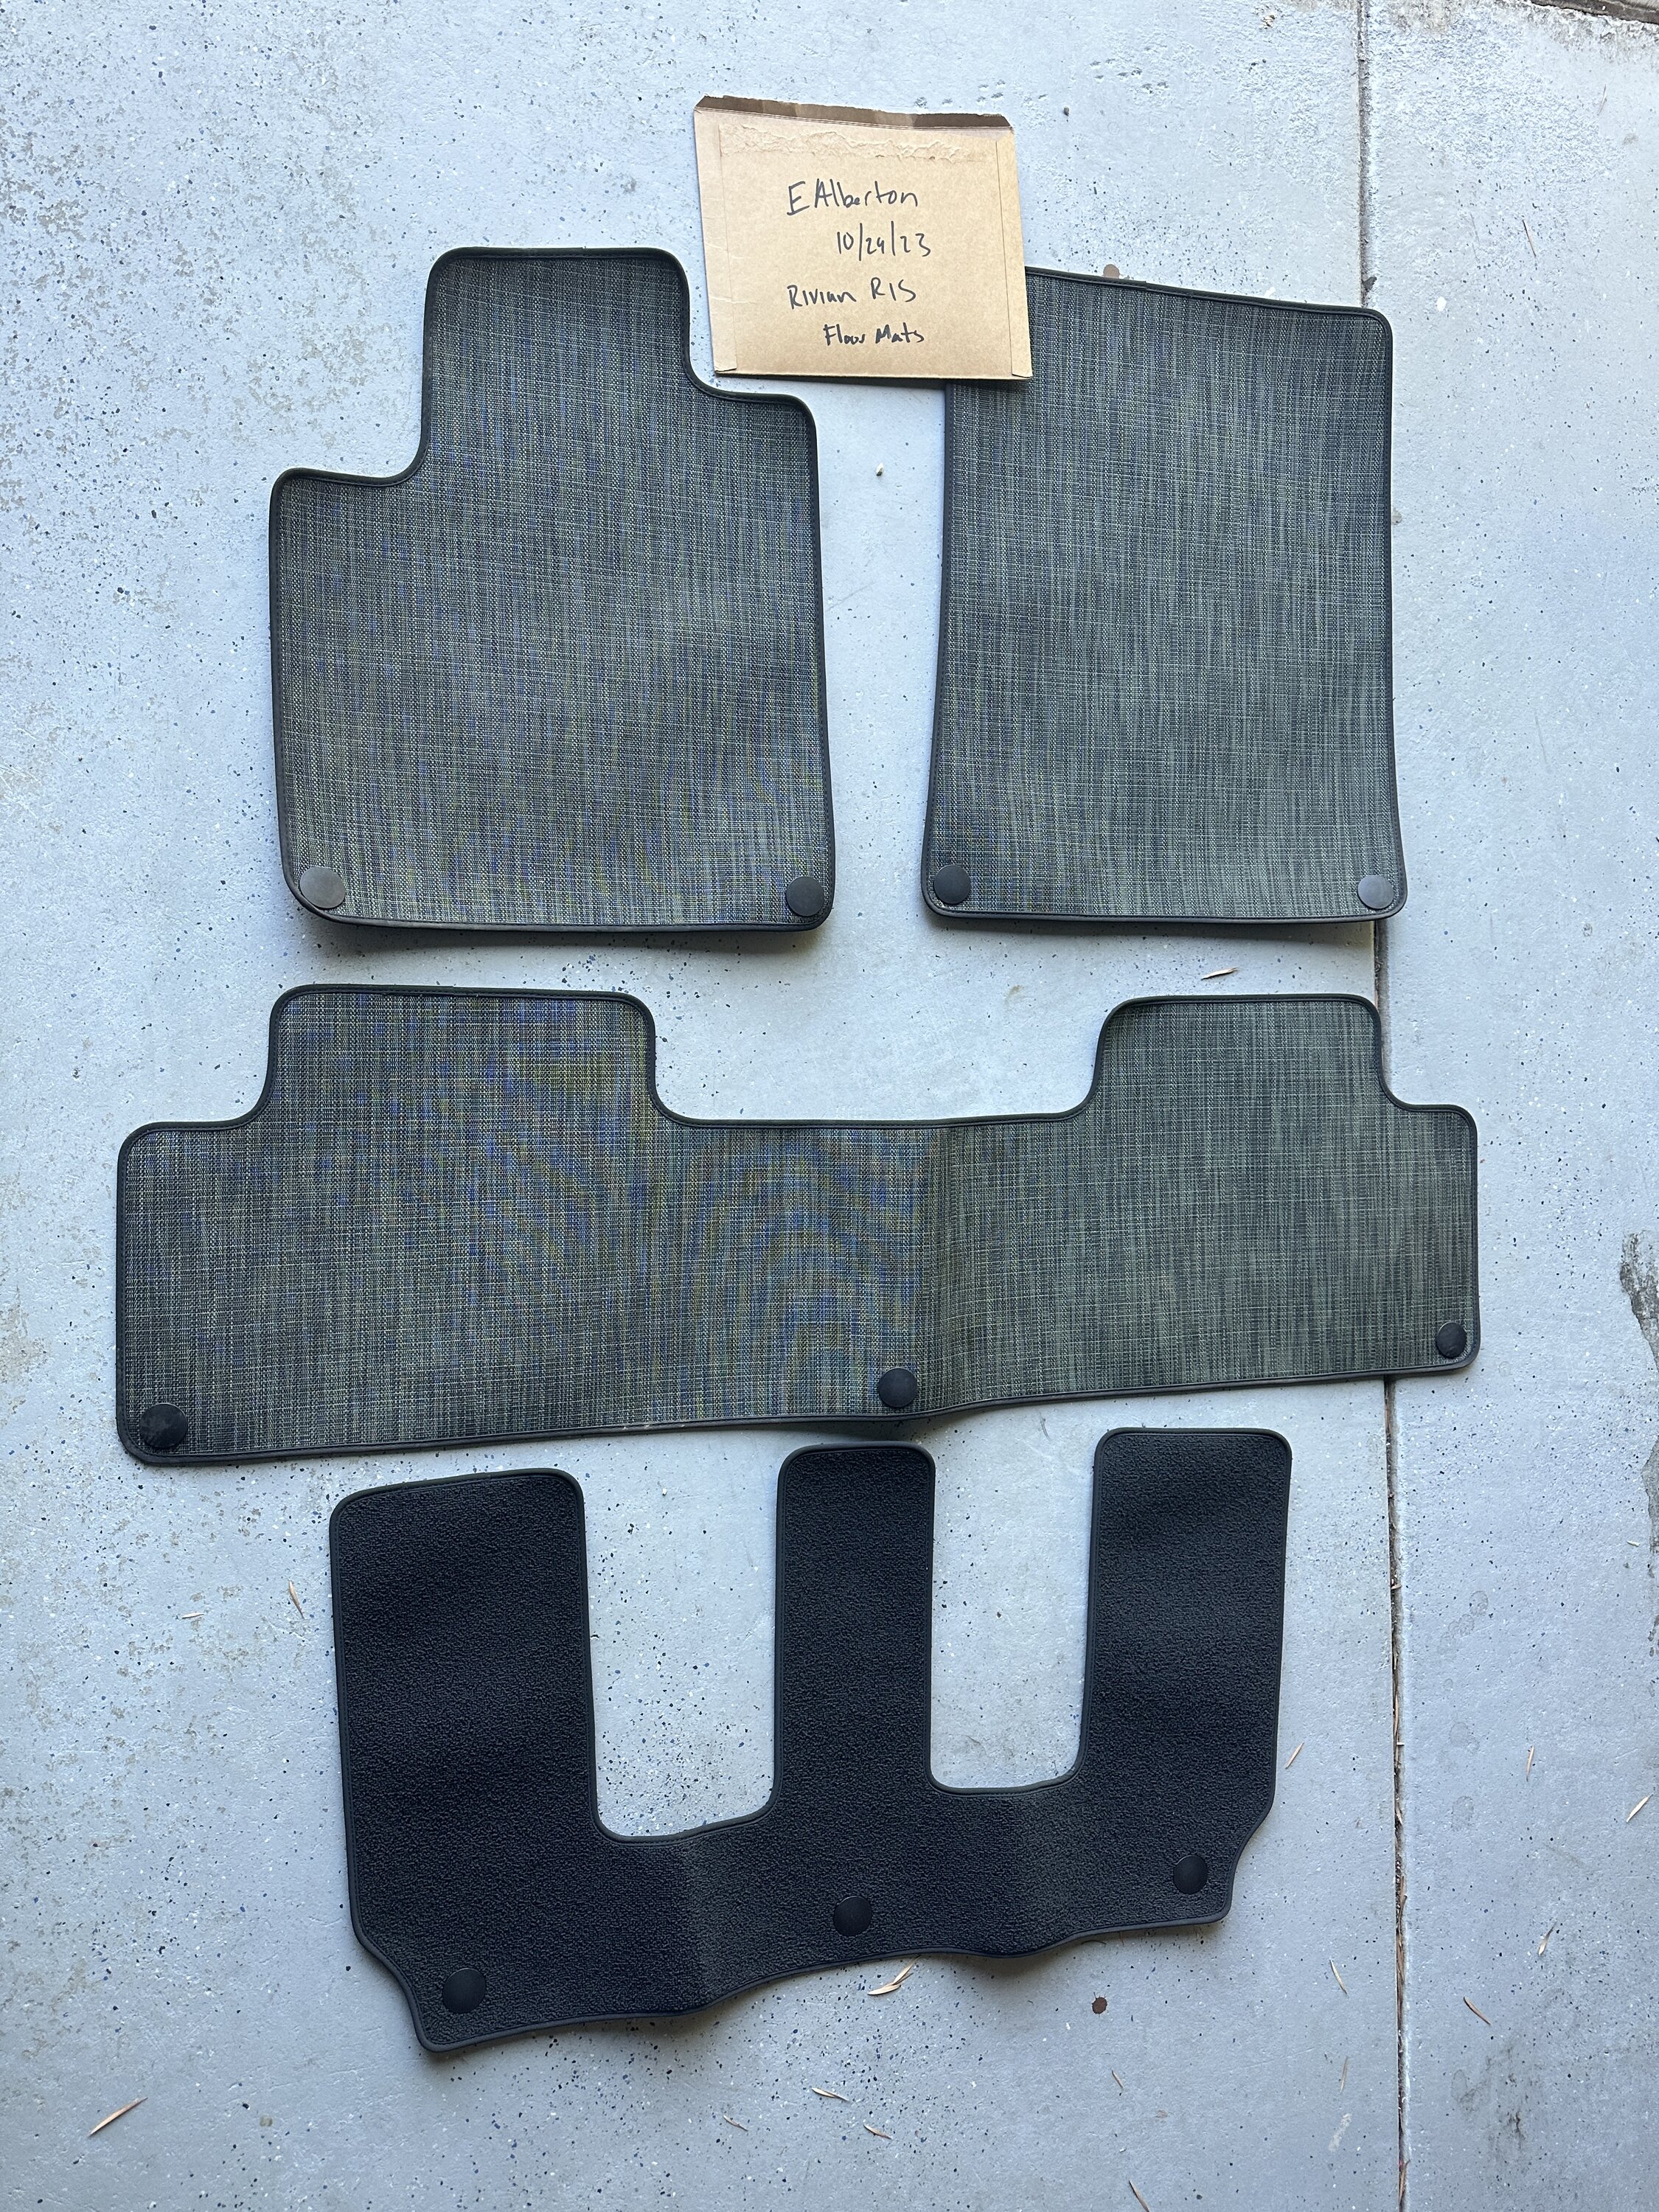 Rivian R1T R1S $50 R1S Floor Mats - New never used IMG_5773